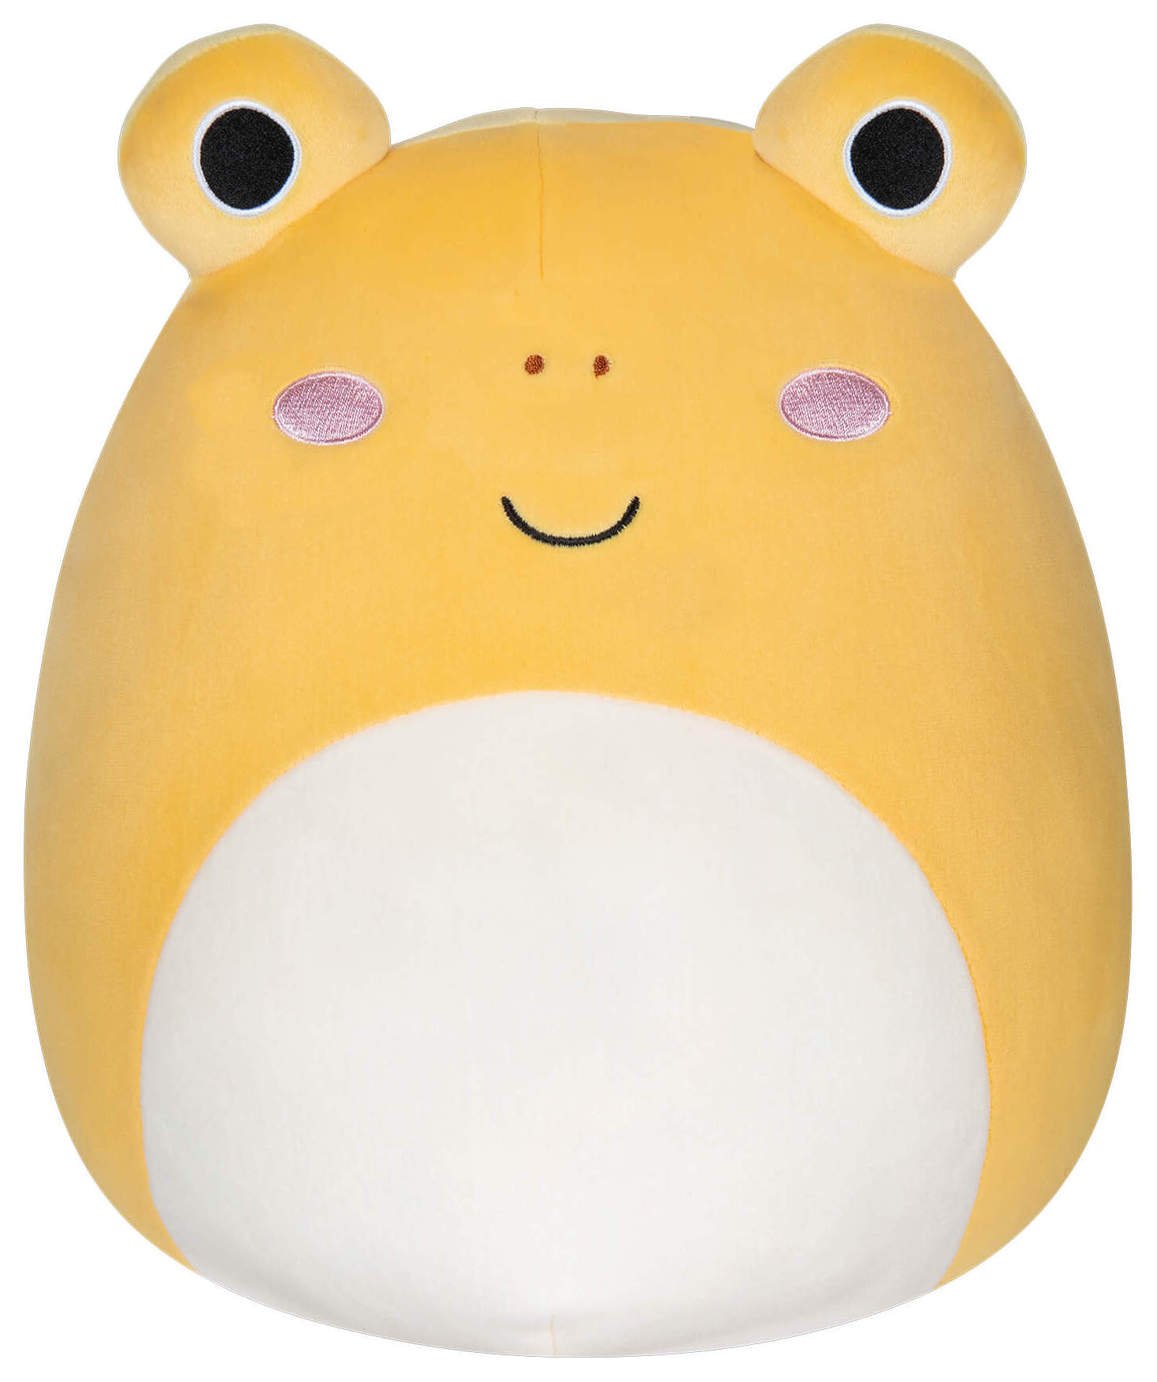 Original Squishmallows 12-inch - Leigh The Yellow Toad